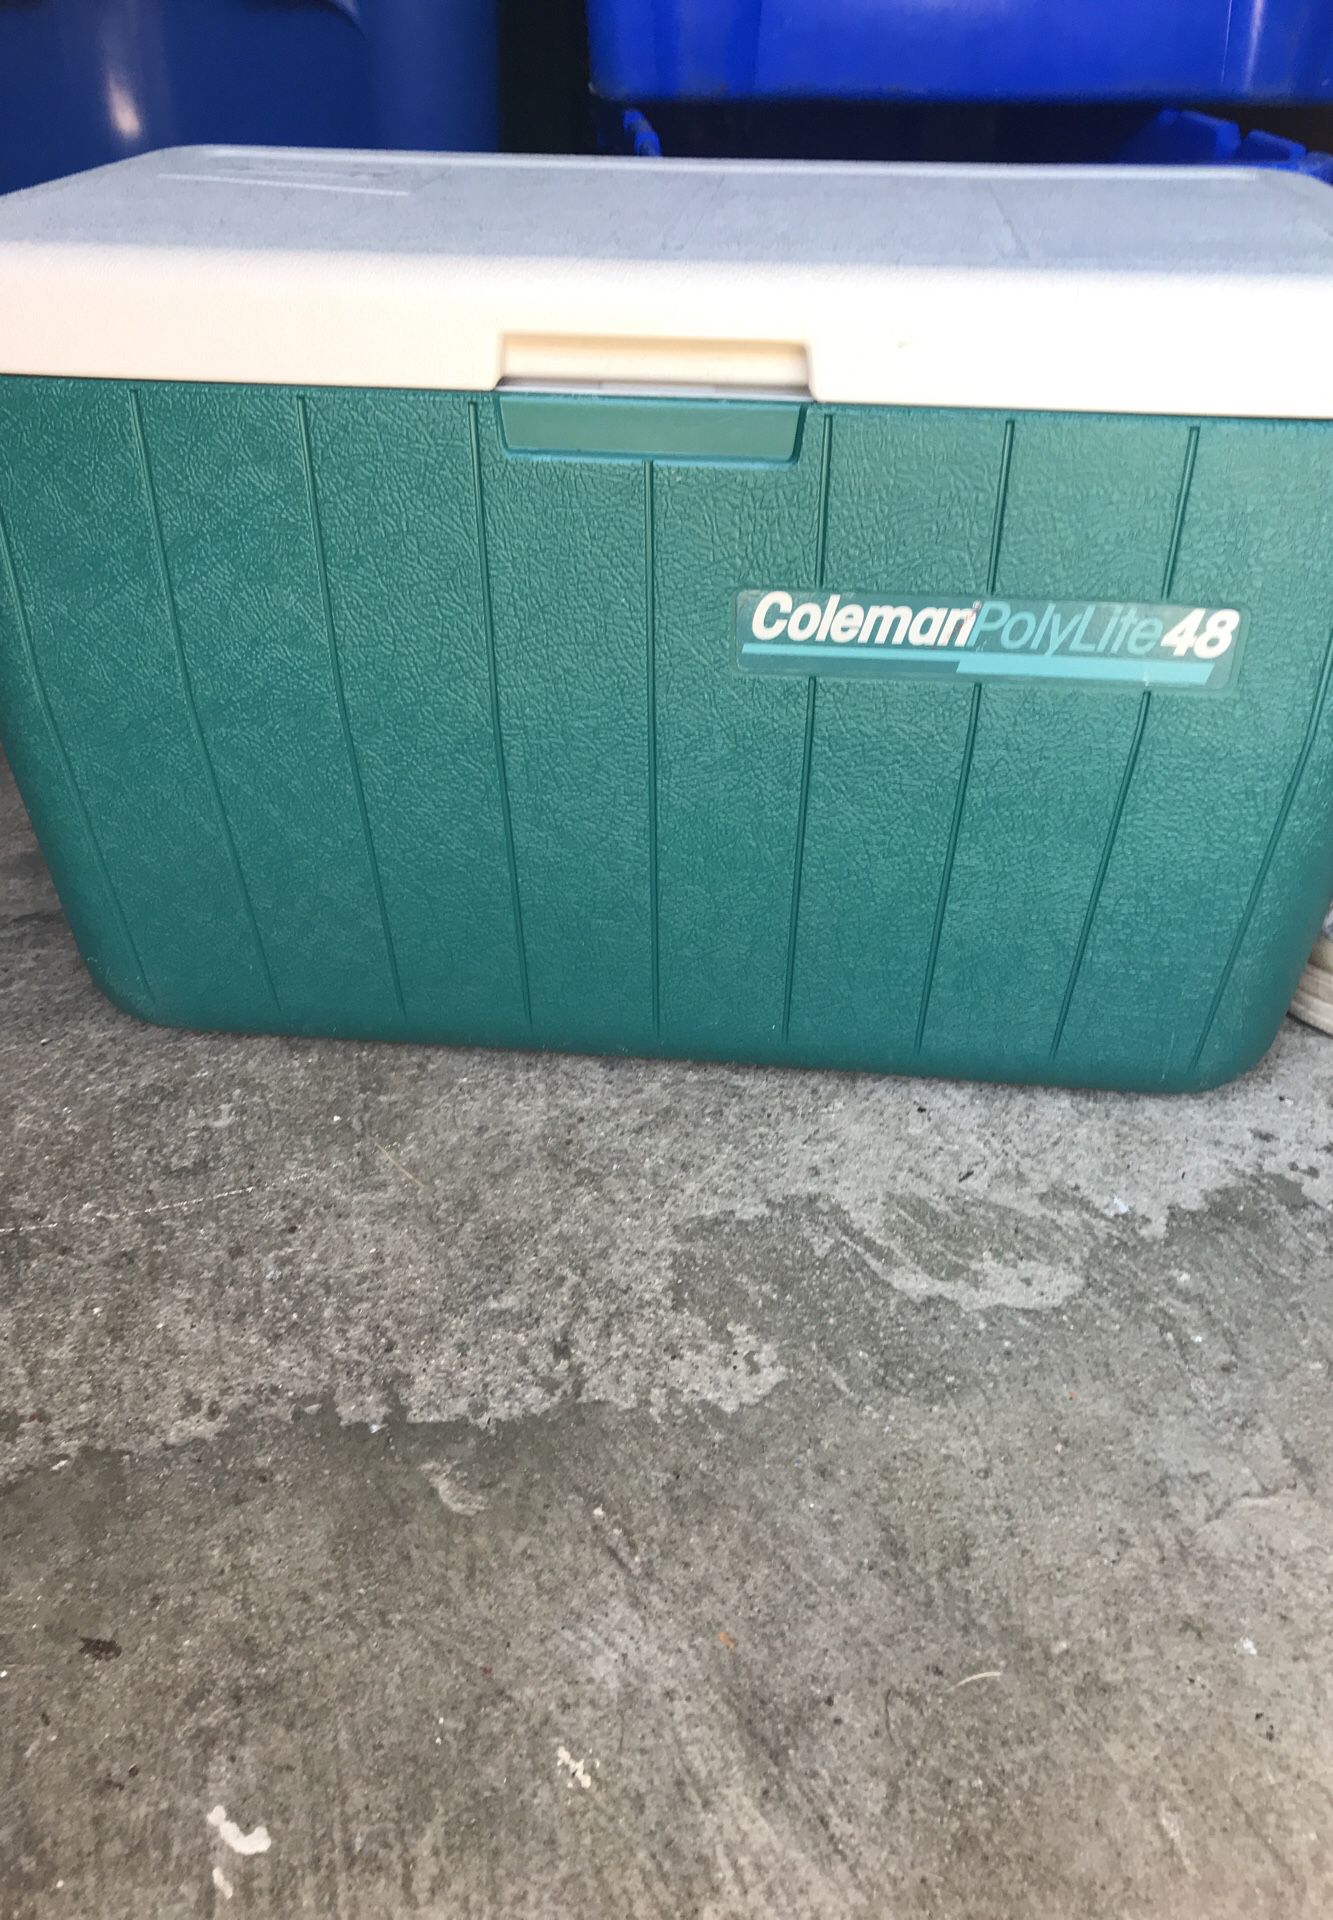 Coleman Water Bottle for Sale in Archdale, NC - OfferUp